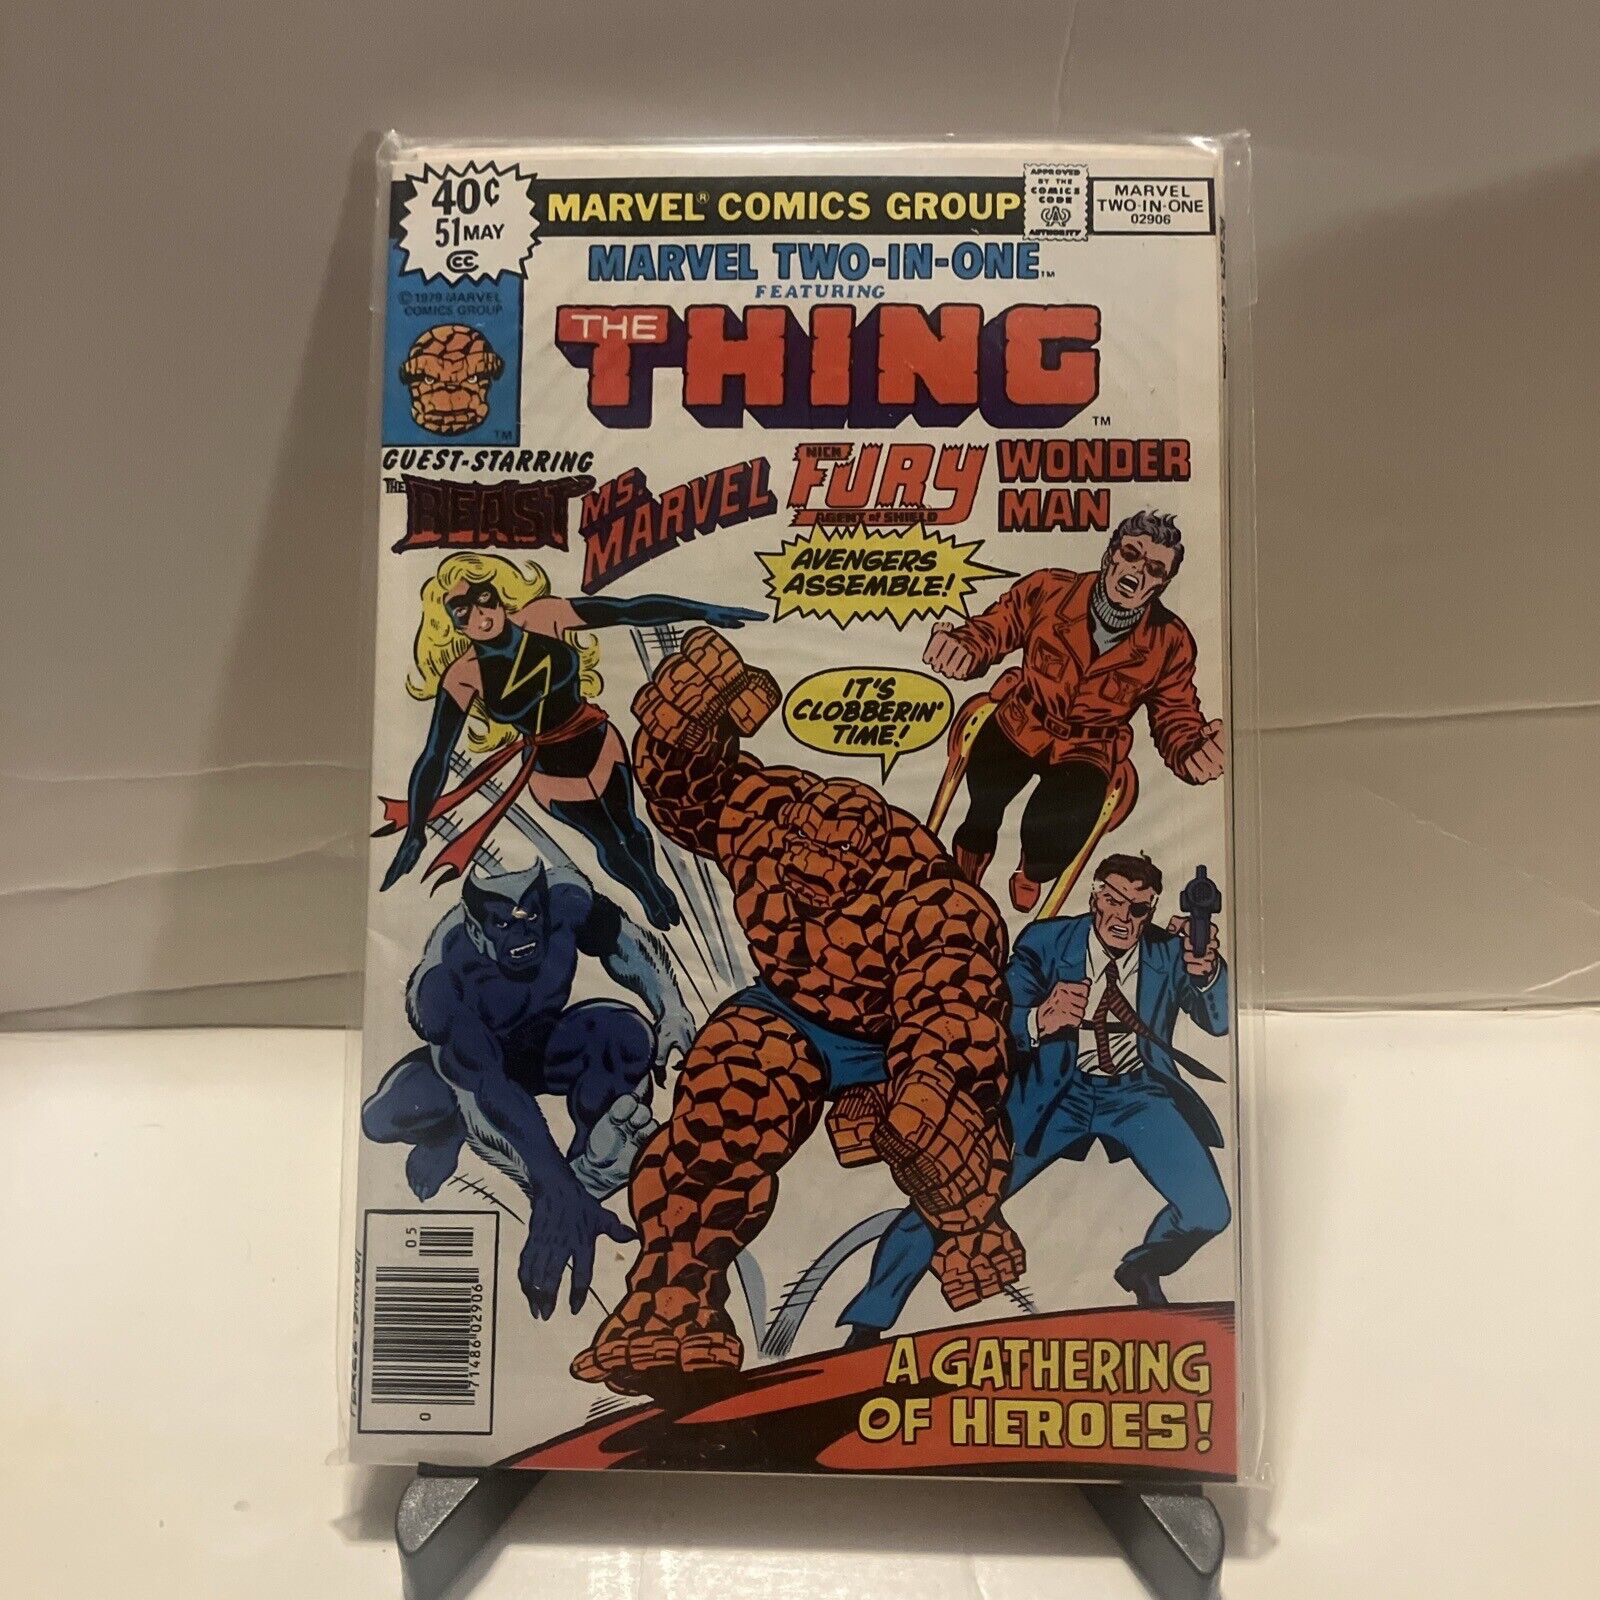 Marvel Two-in-One #51 May 1979 Marvel Comics